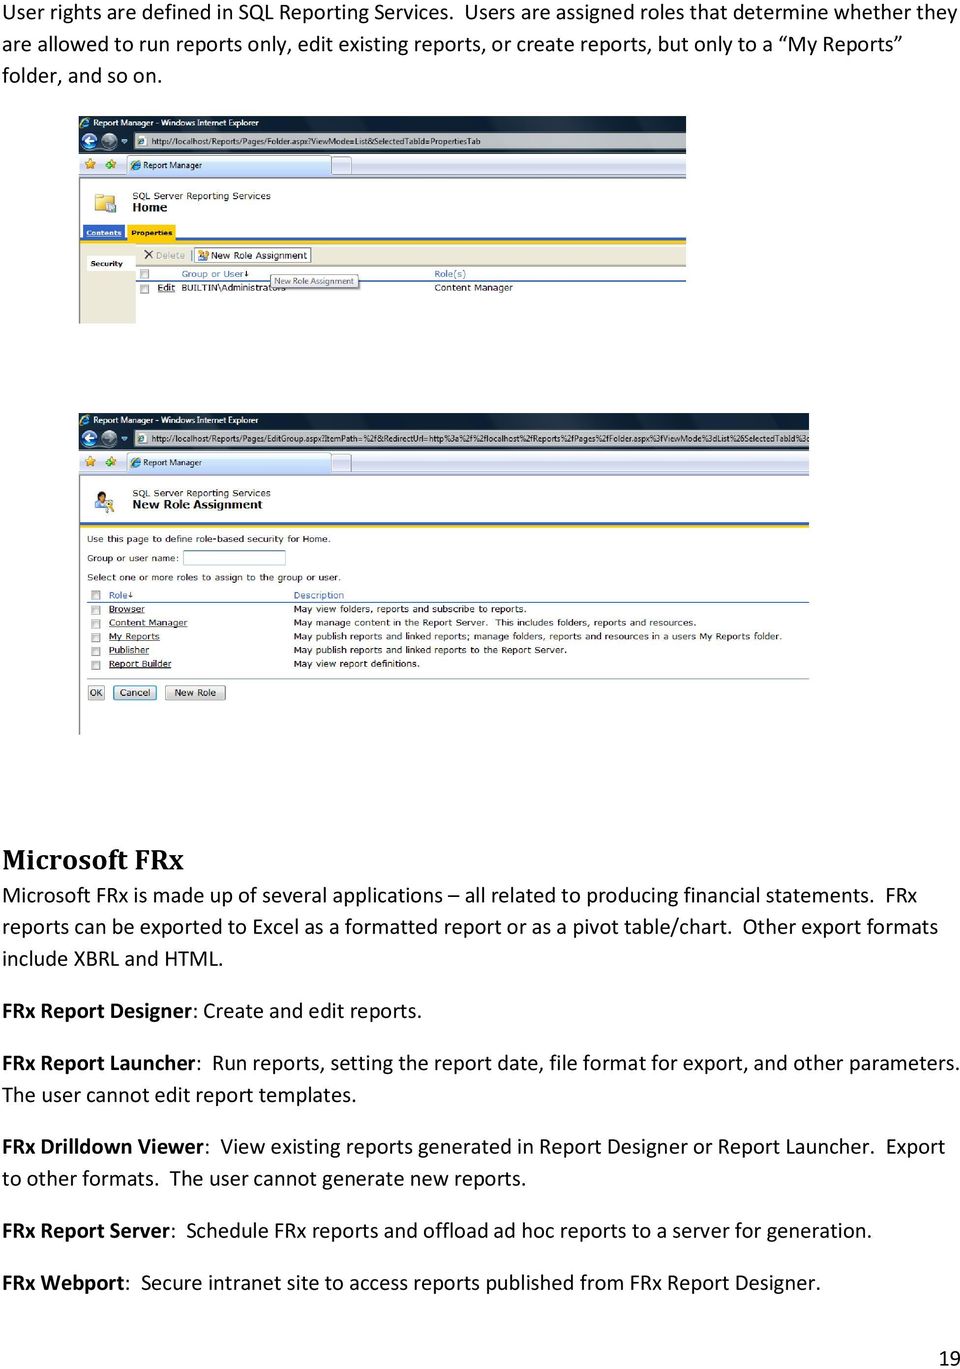 Microsoft FRx Microsoft FRx is made up of several applications all related to producing financial statements. FRx reports can be exported to Excel as a formatted report or as a pivot table/chart.